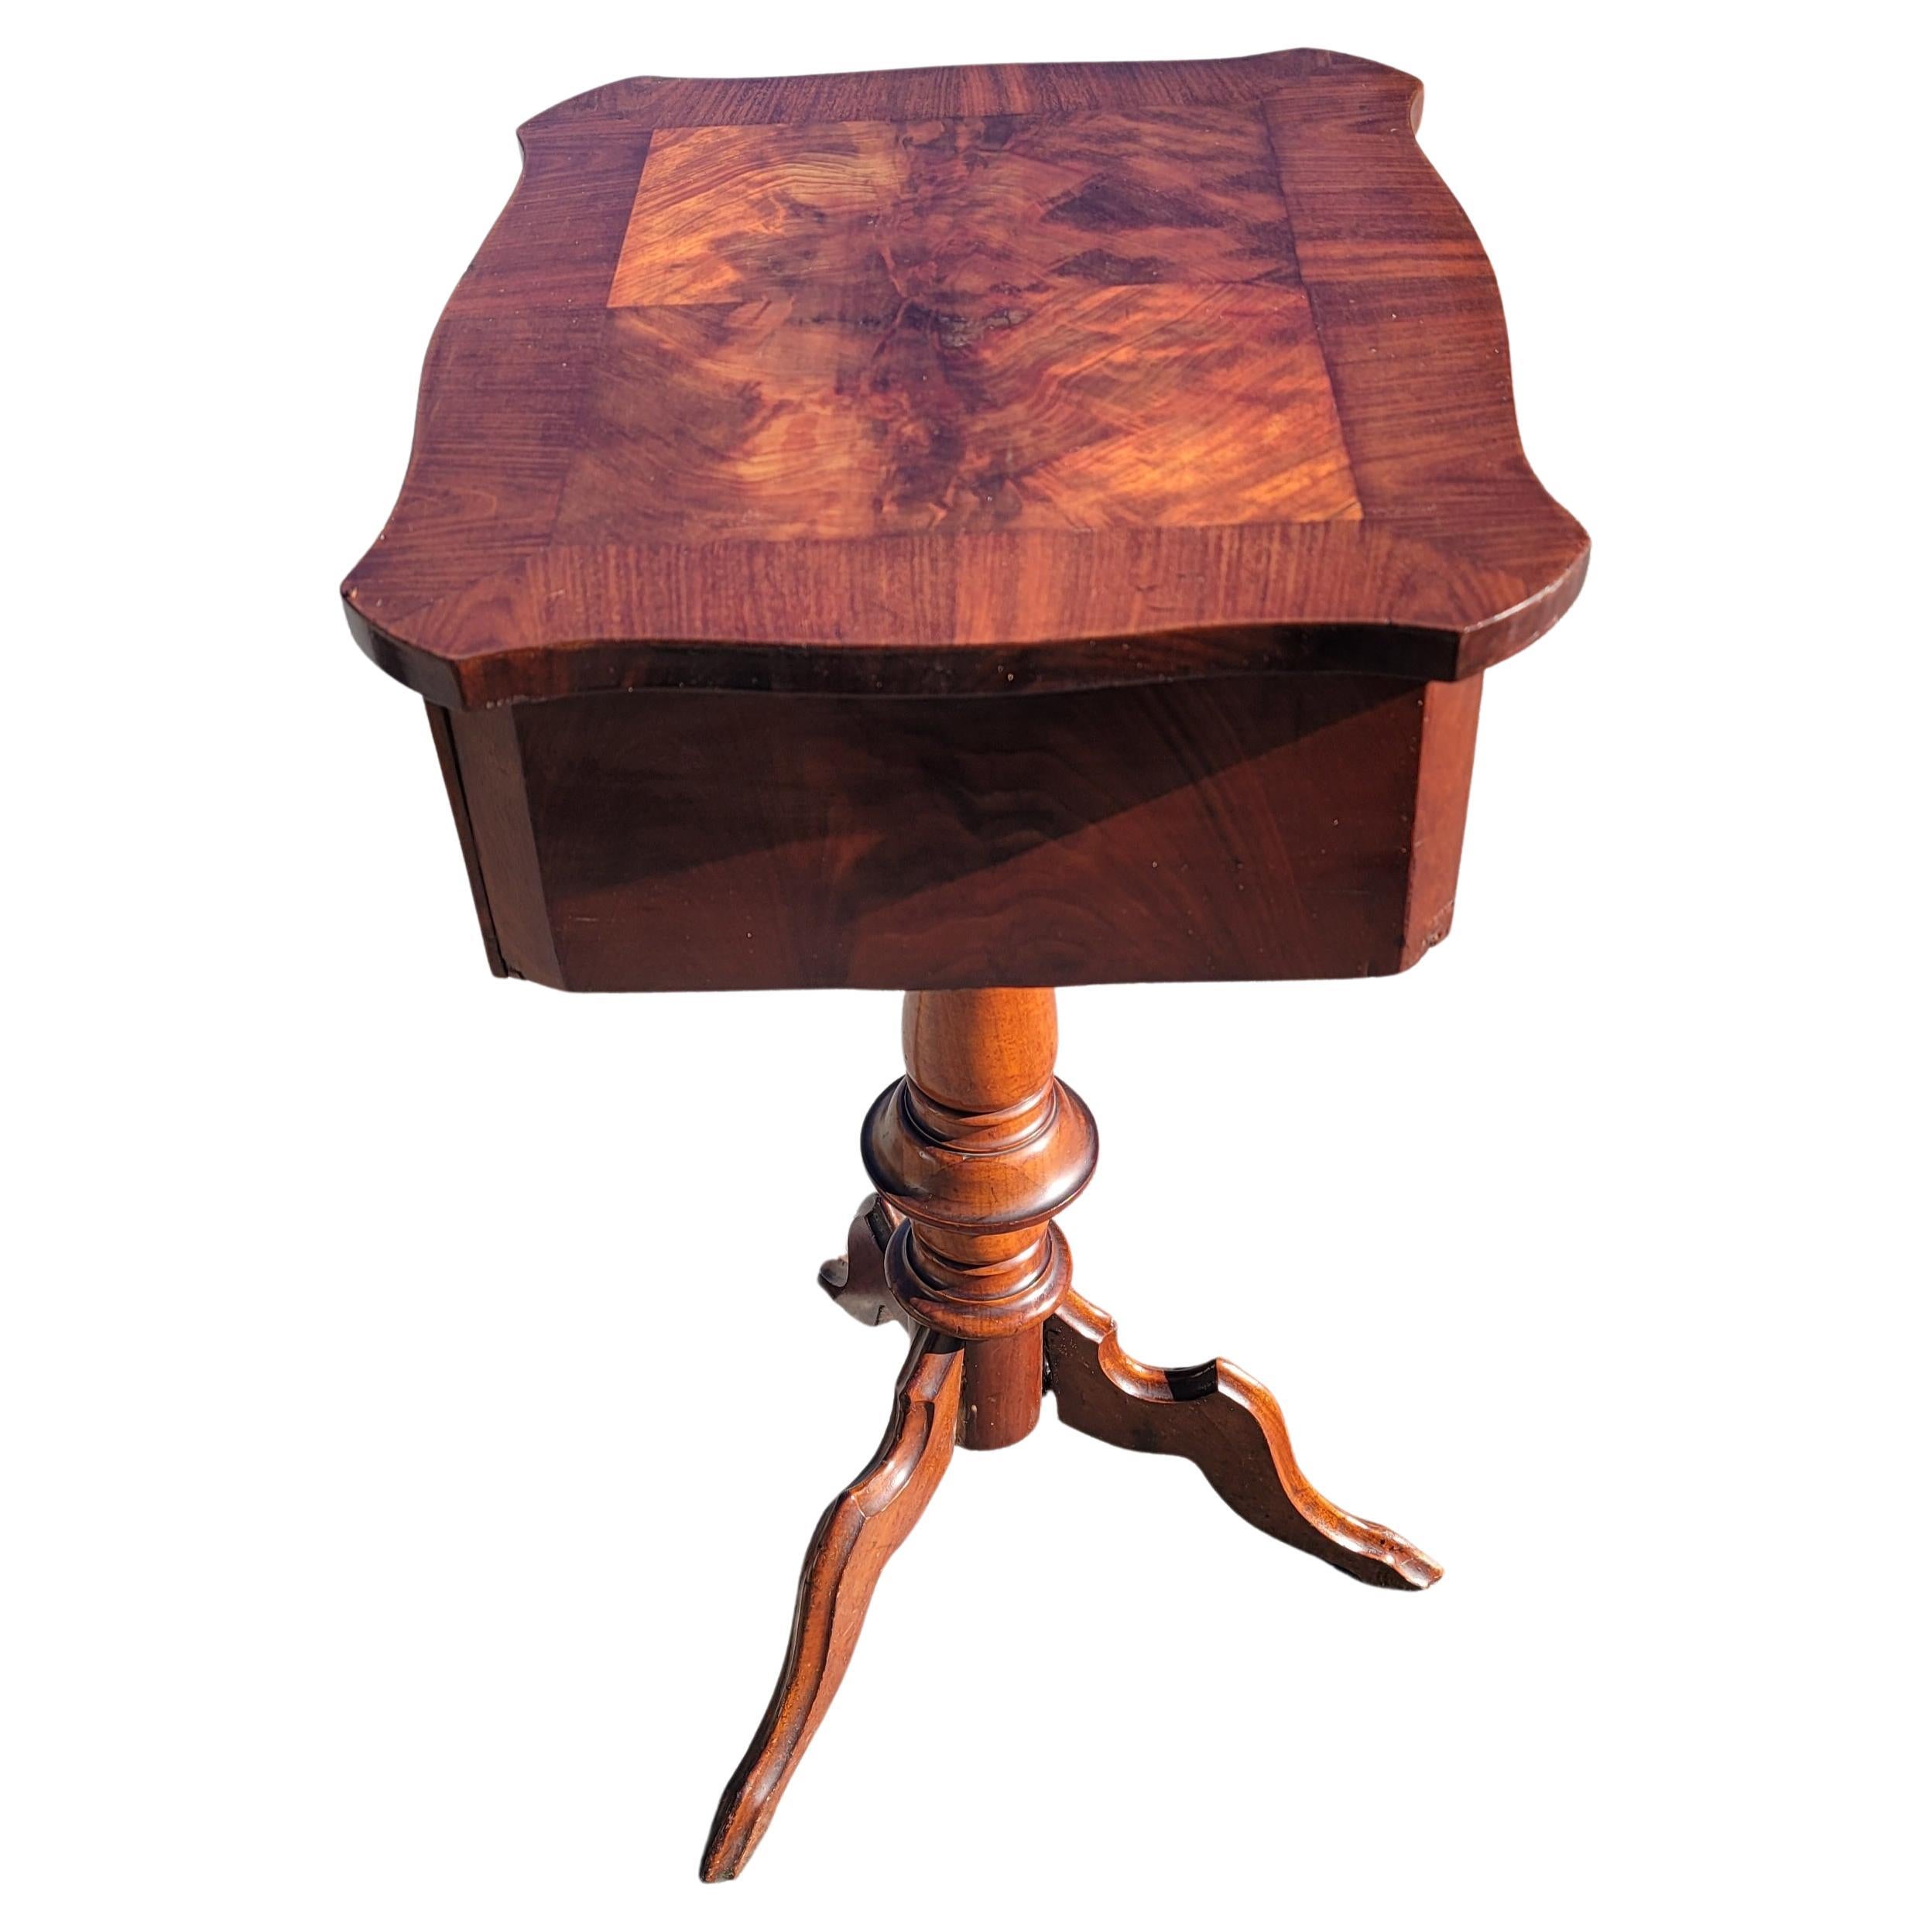 Biedermeier Flame Mahogany Pedestal 2-Drawer Side Table / Sewing Table, C. 1840 For Sale 1